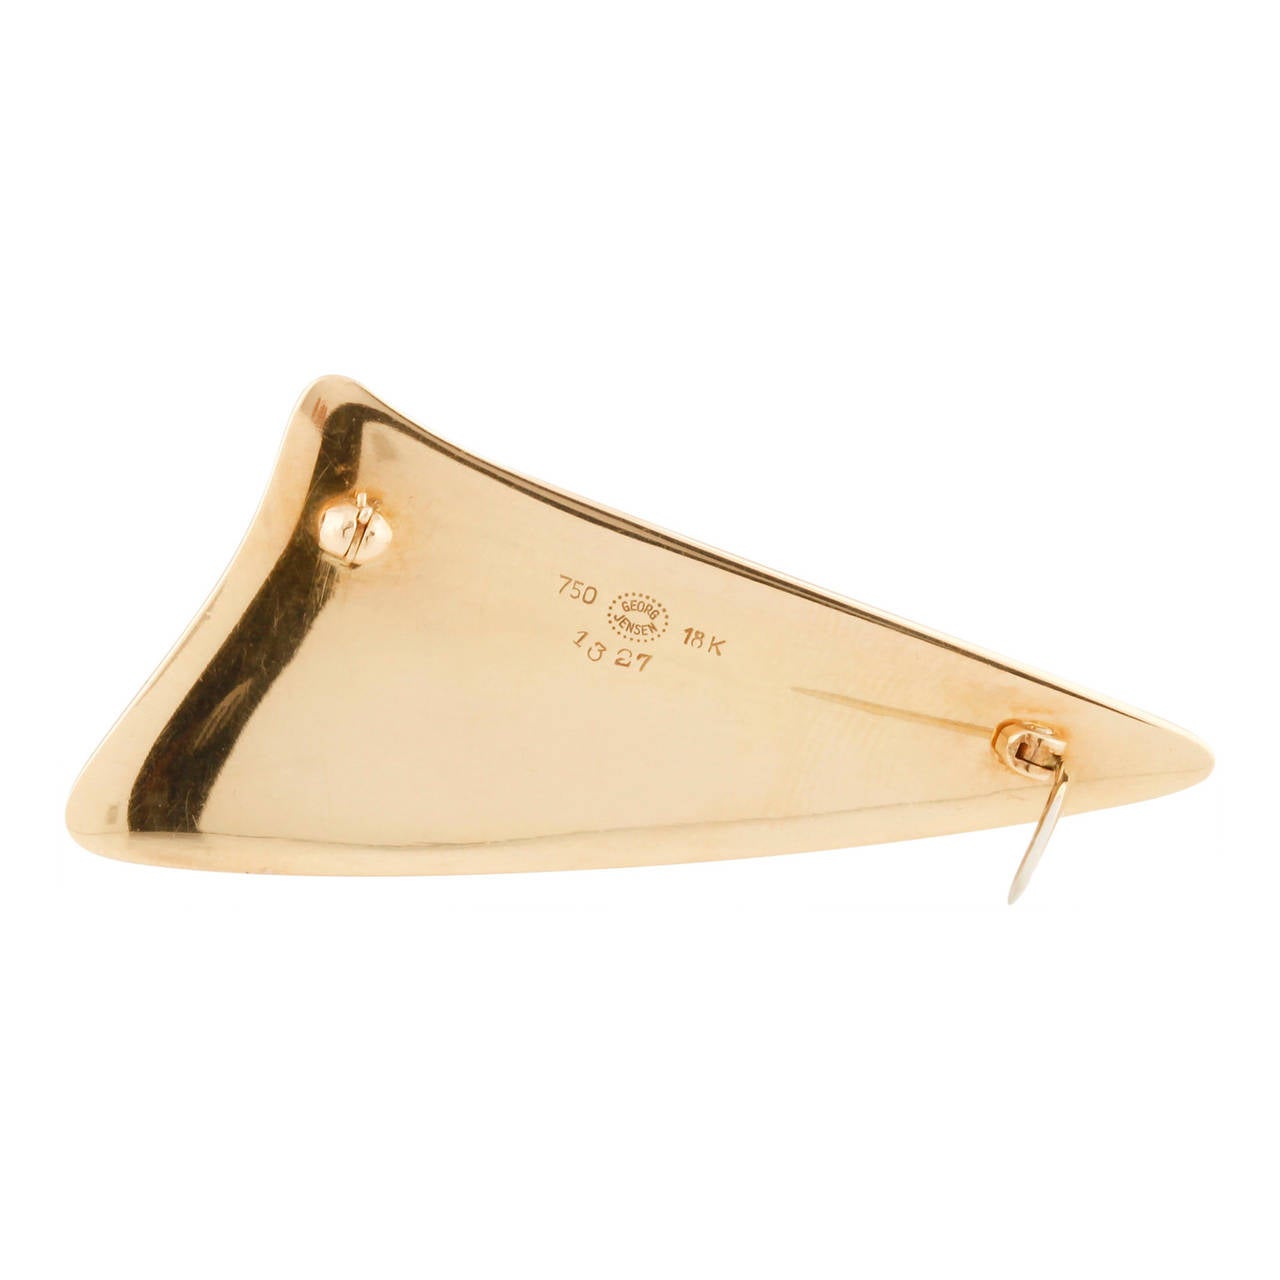 Rare 18ct Modernist Yellow Gold Brooch/Pin designed by Henning Koppel for the Georg Jensen firm. Design #327 c1950. Accompanying Jensen jewellery pouch
Gold Jensen is seldom available on the market and highly sought after by avid Jensen collectors.